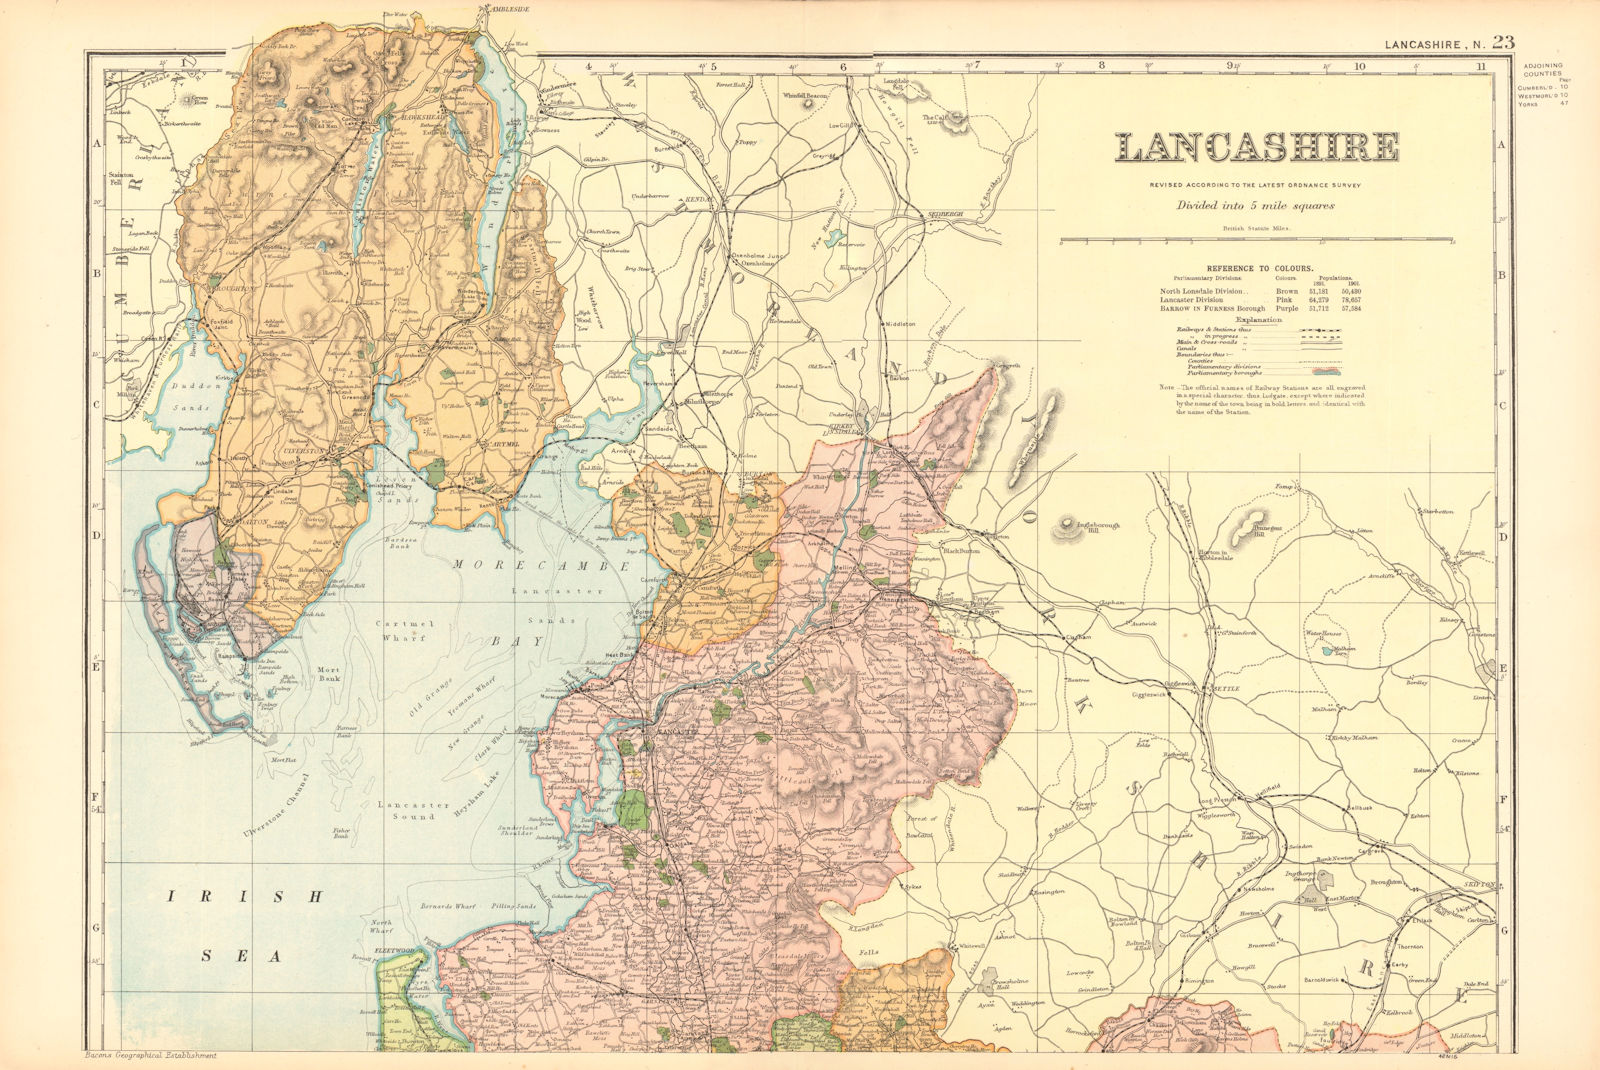 LANCASHIRE (NORTH). Showing Parliamentary divisions & parks. BACON 1904 map